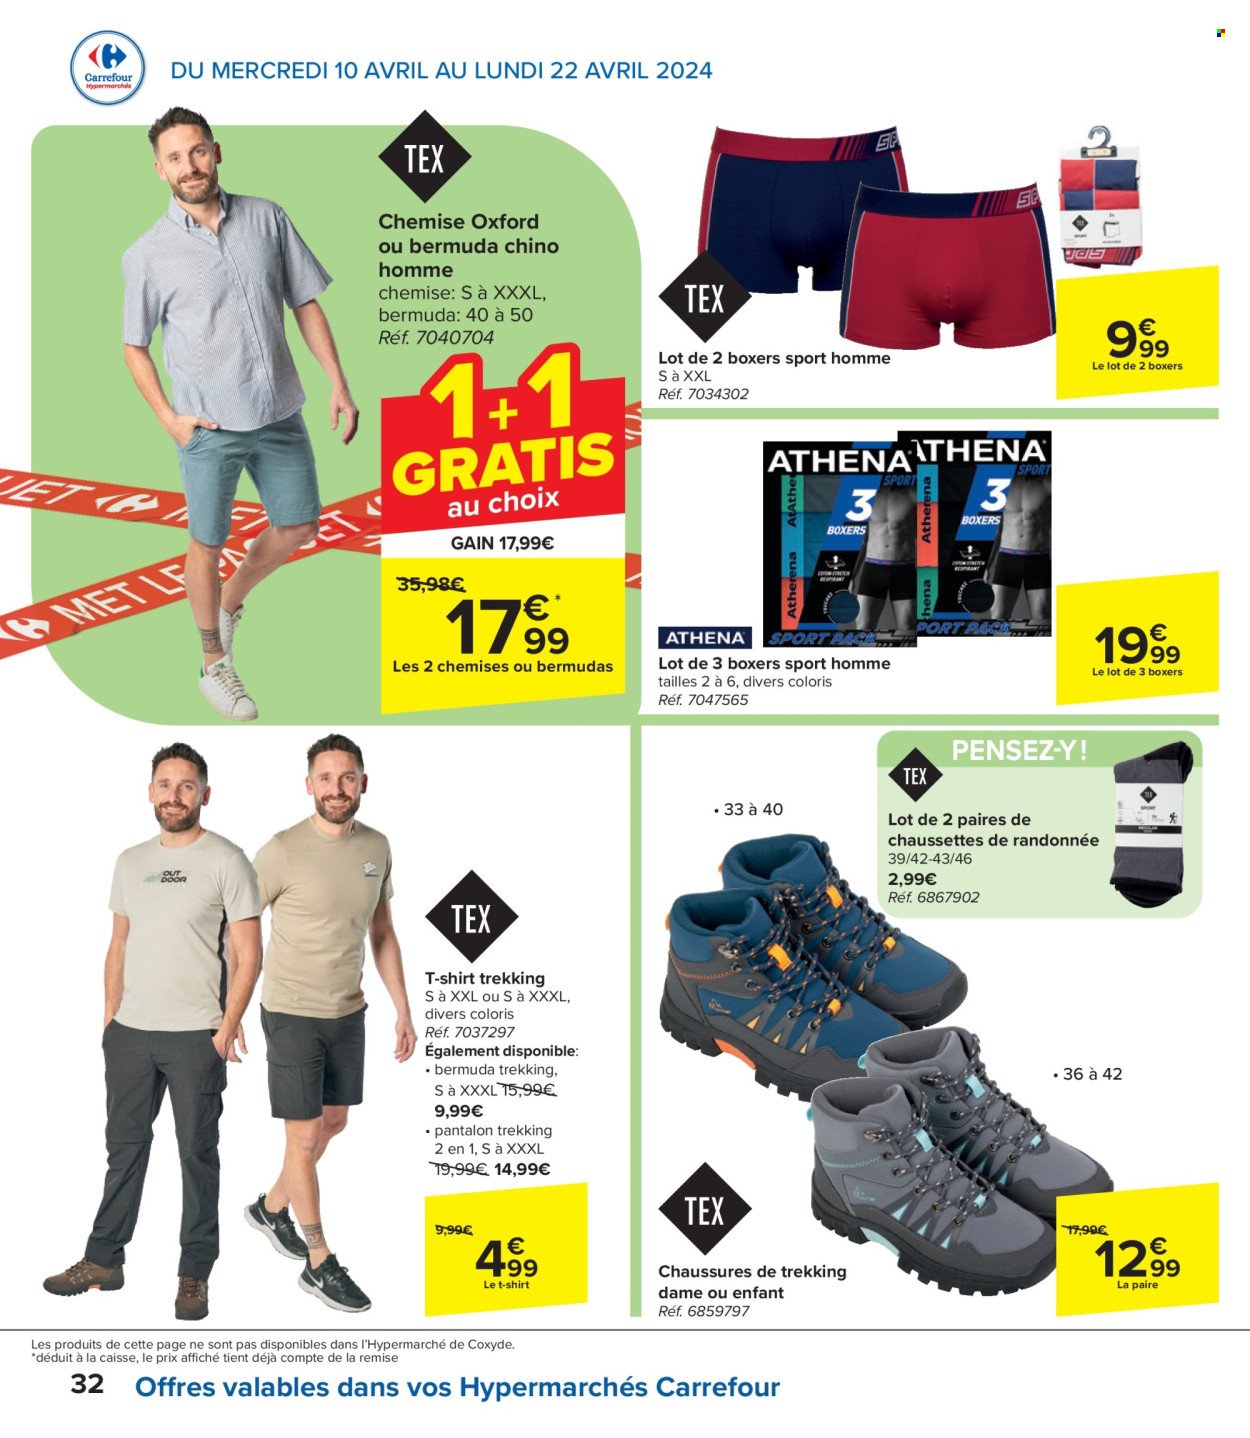 Catalogue Carrefour hypermarkt - 10.4.2024 - 22.4.2024. Page 32.